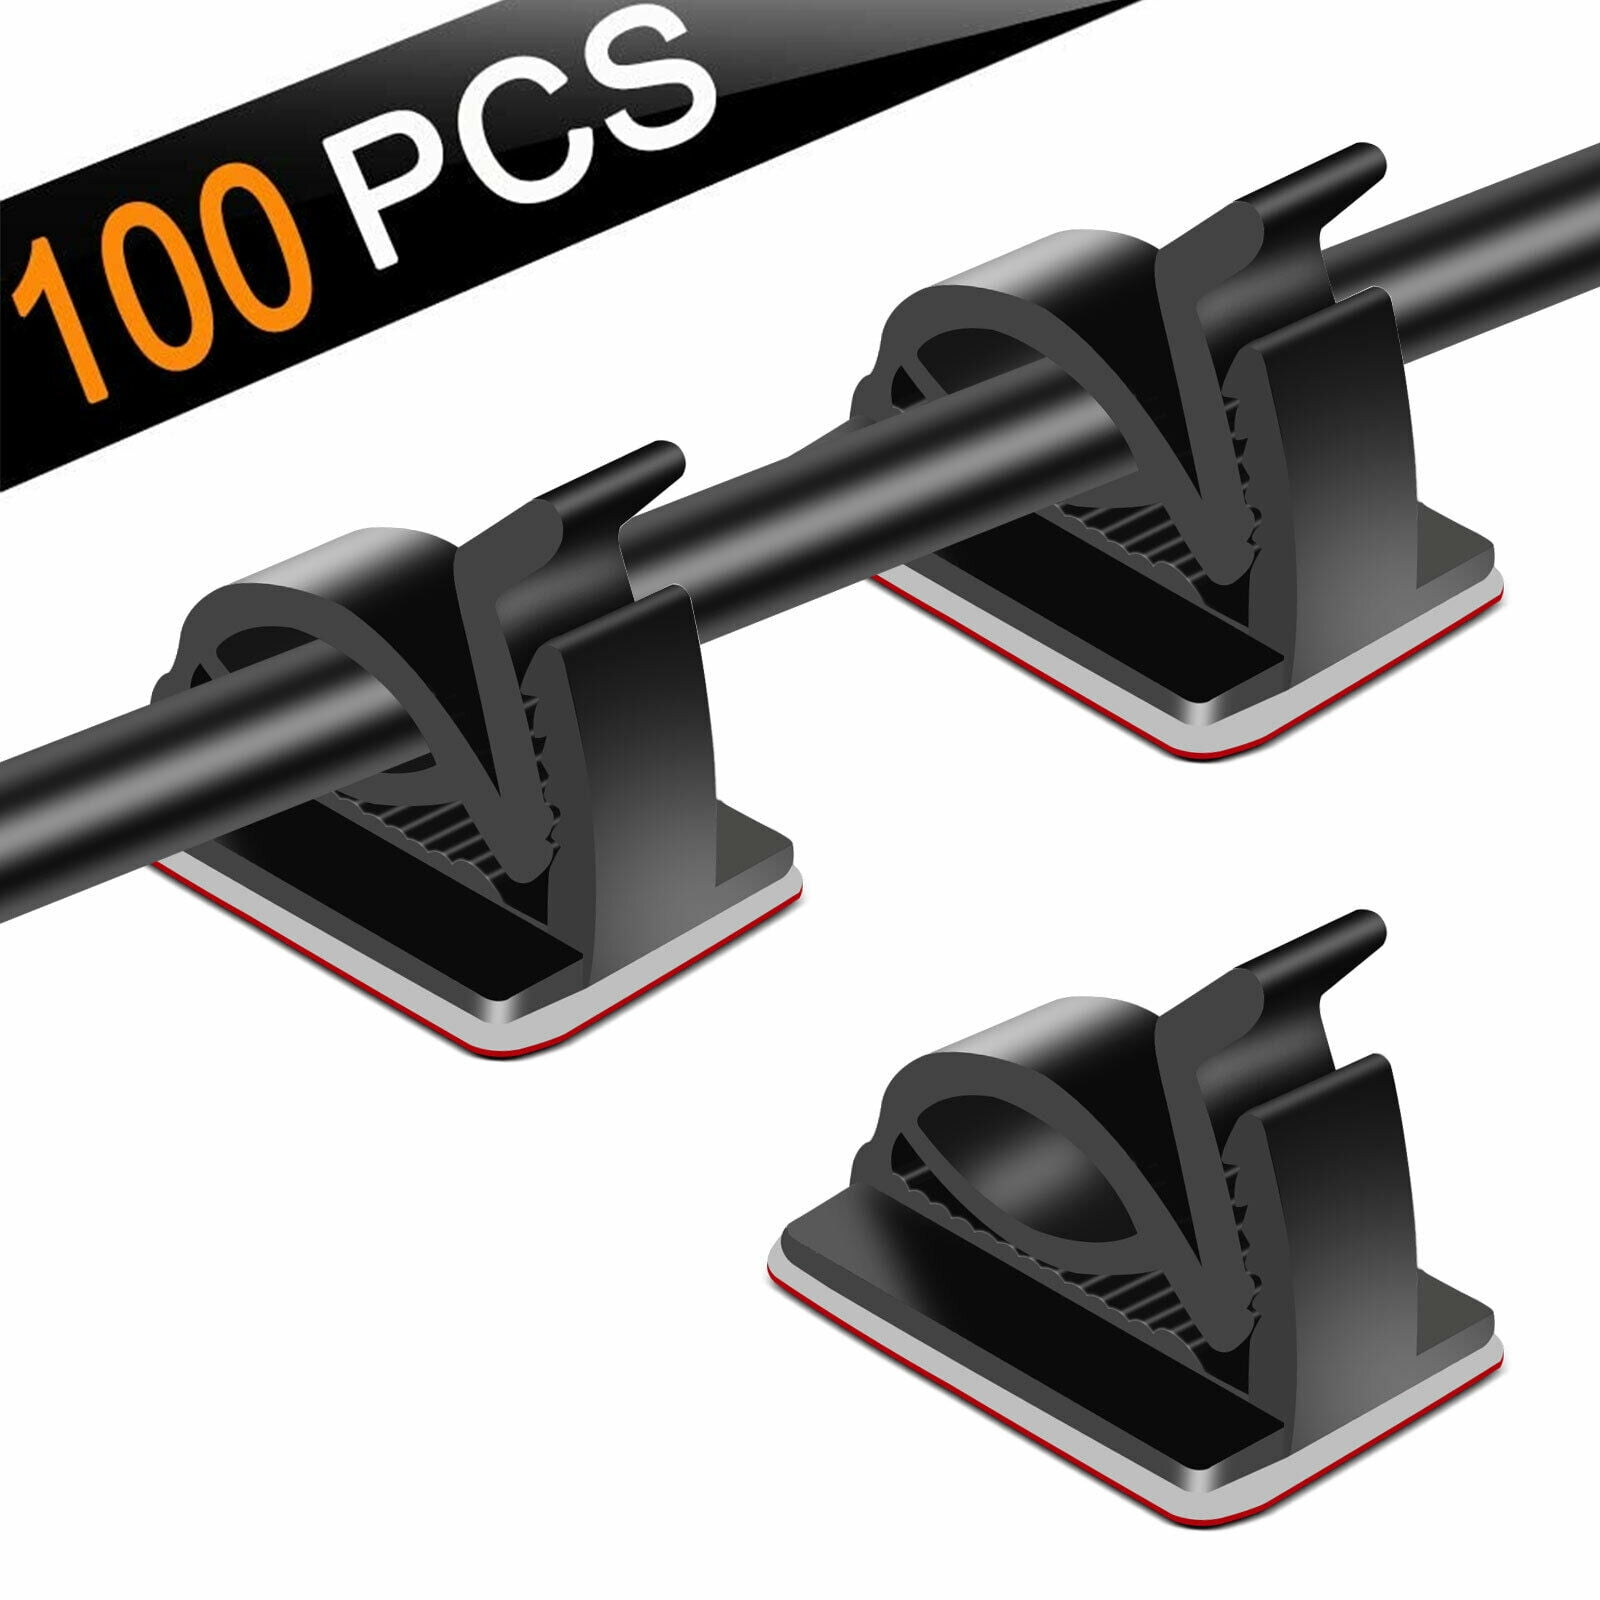 50 Pcs Cable Ties 80 Cable Cord Sleeves 30 Pcs Black Adhesive Clips for TV Computer Office Theater Cable Management 